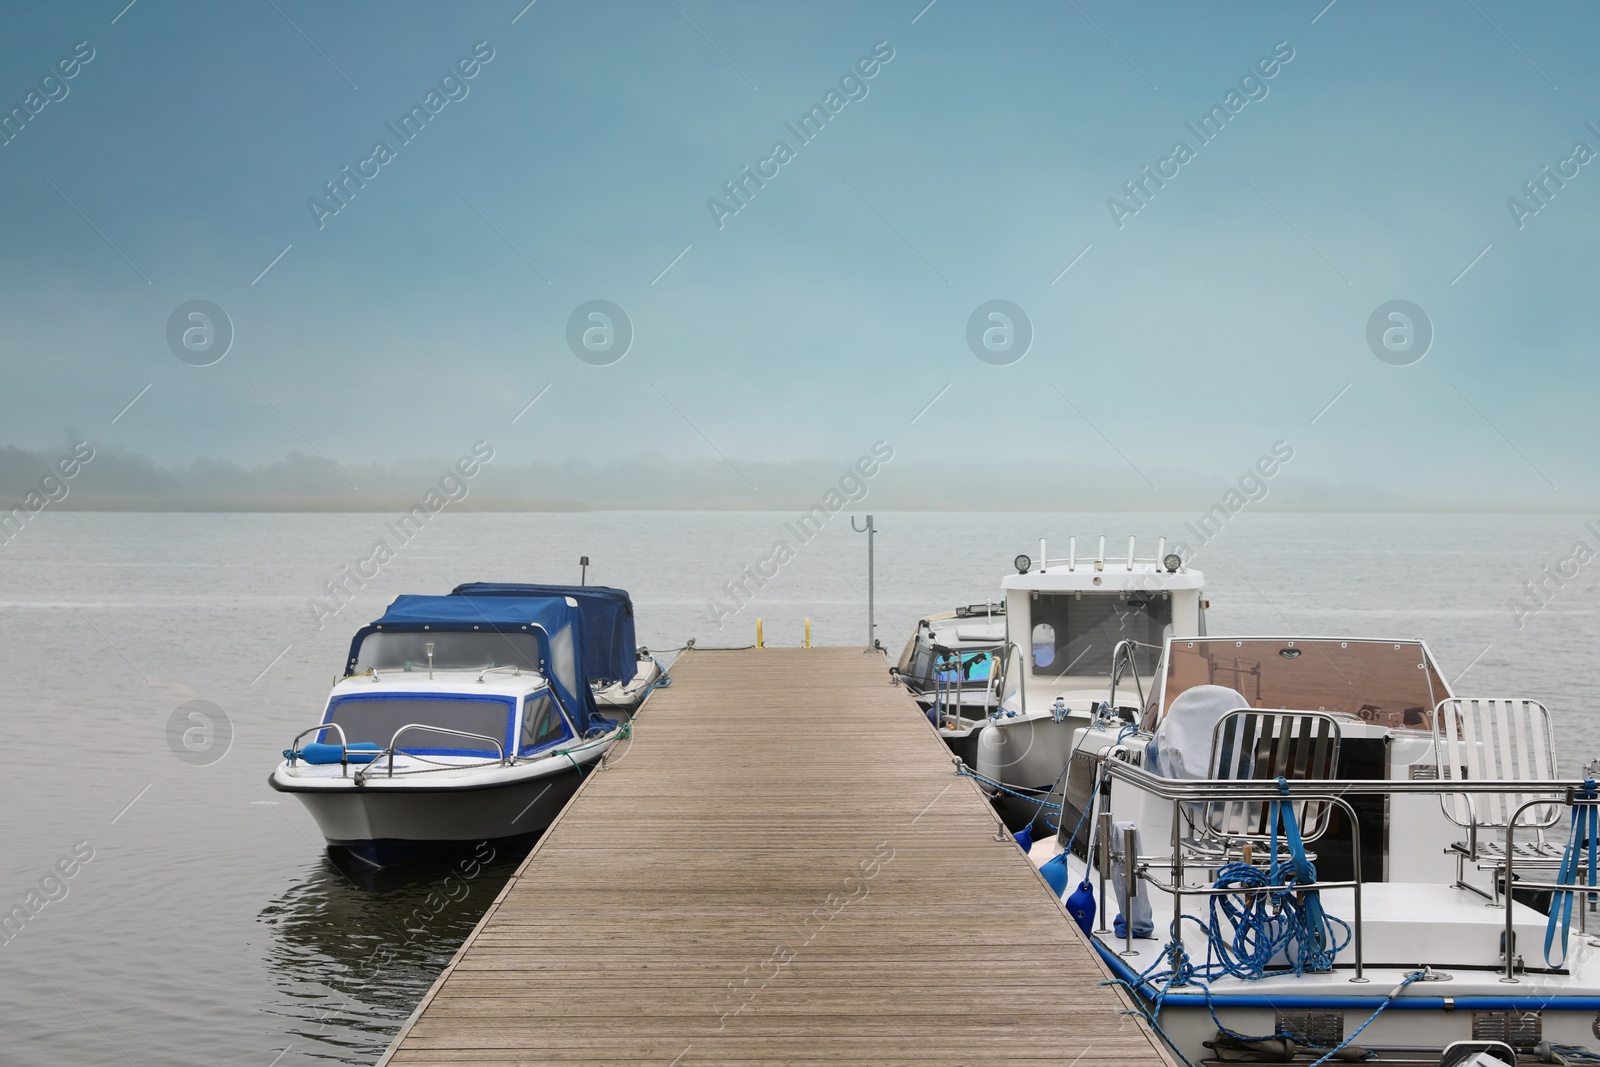 Photo of Picturesque view of wooden pier with moored boats